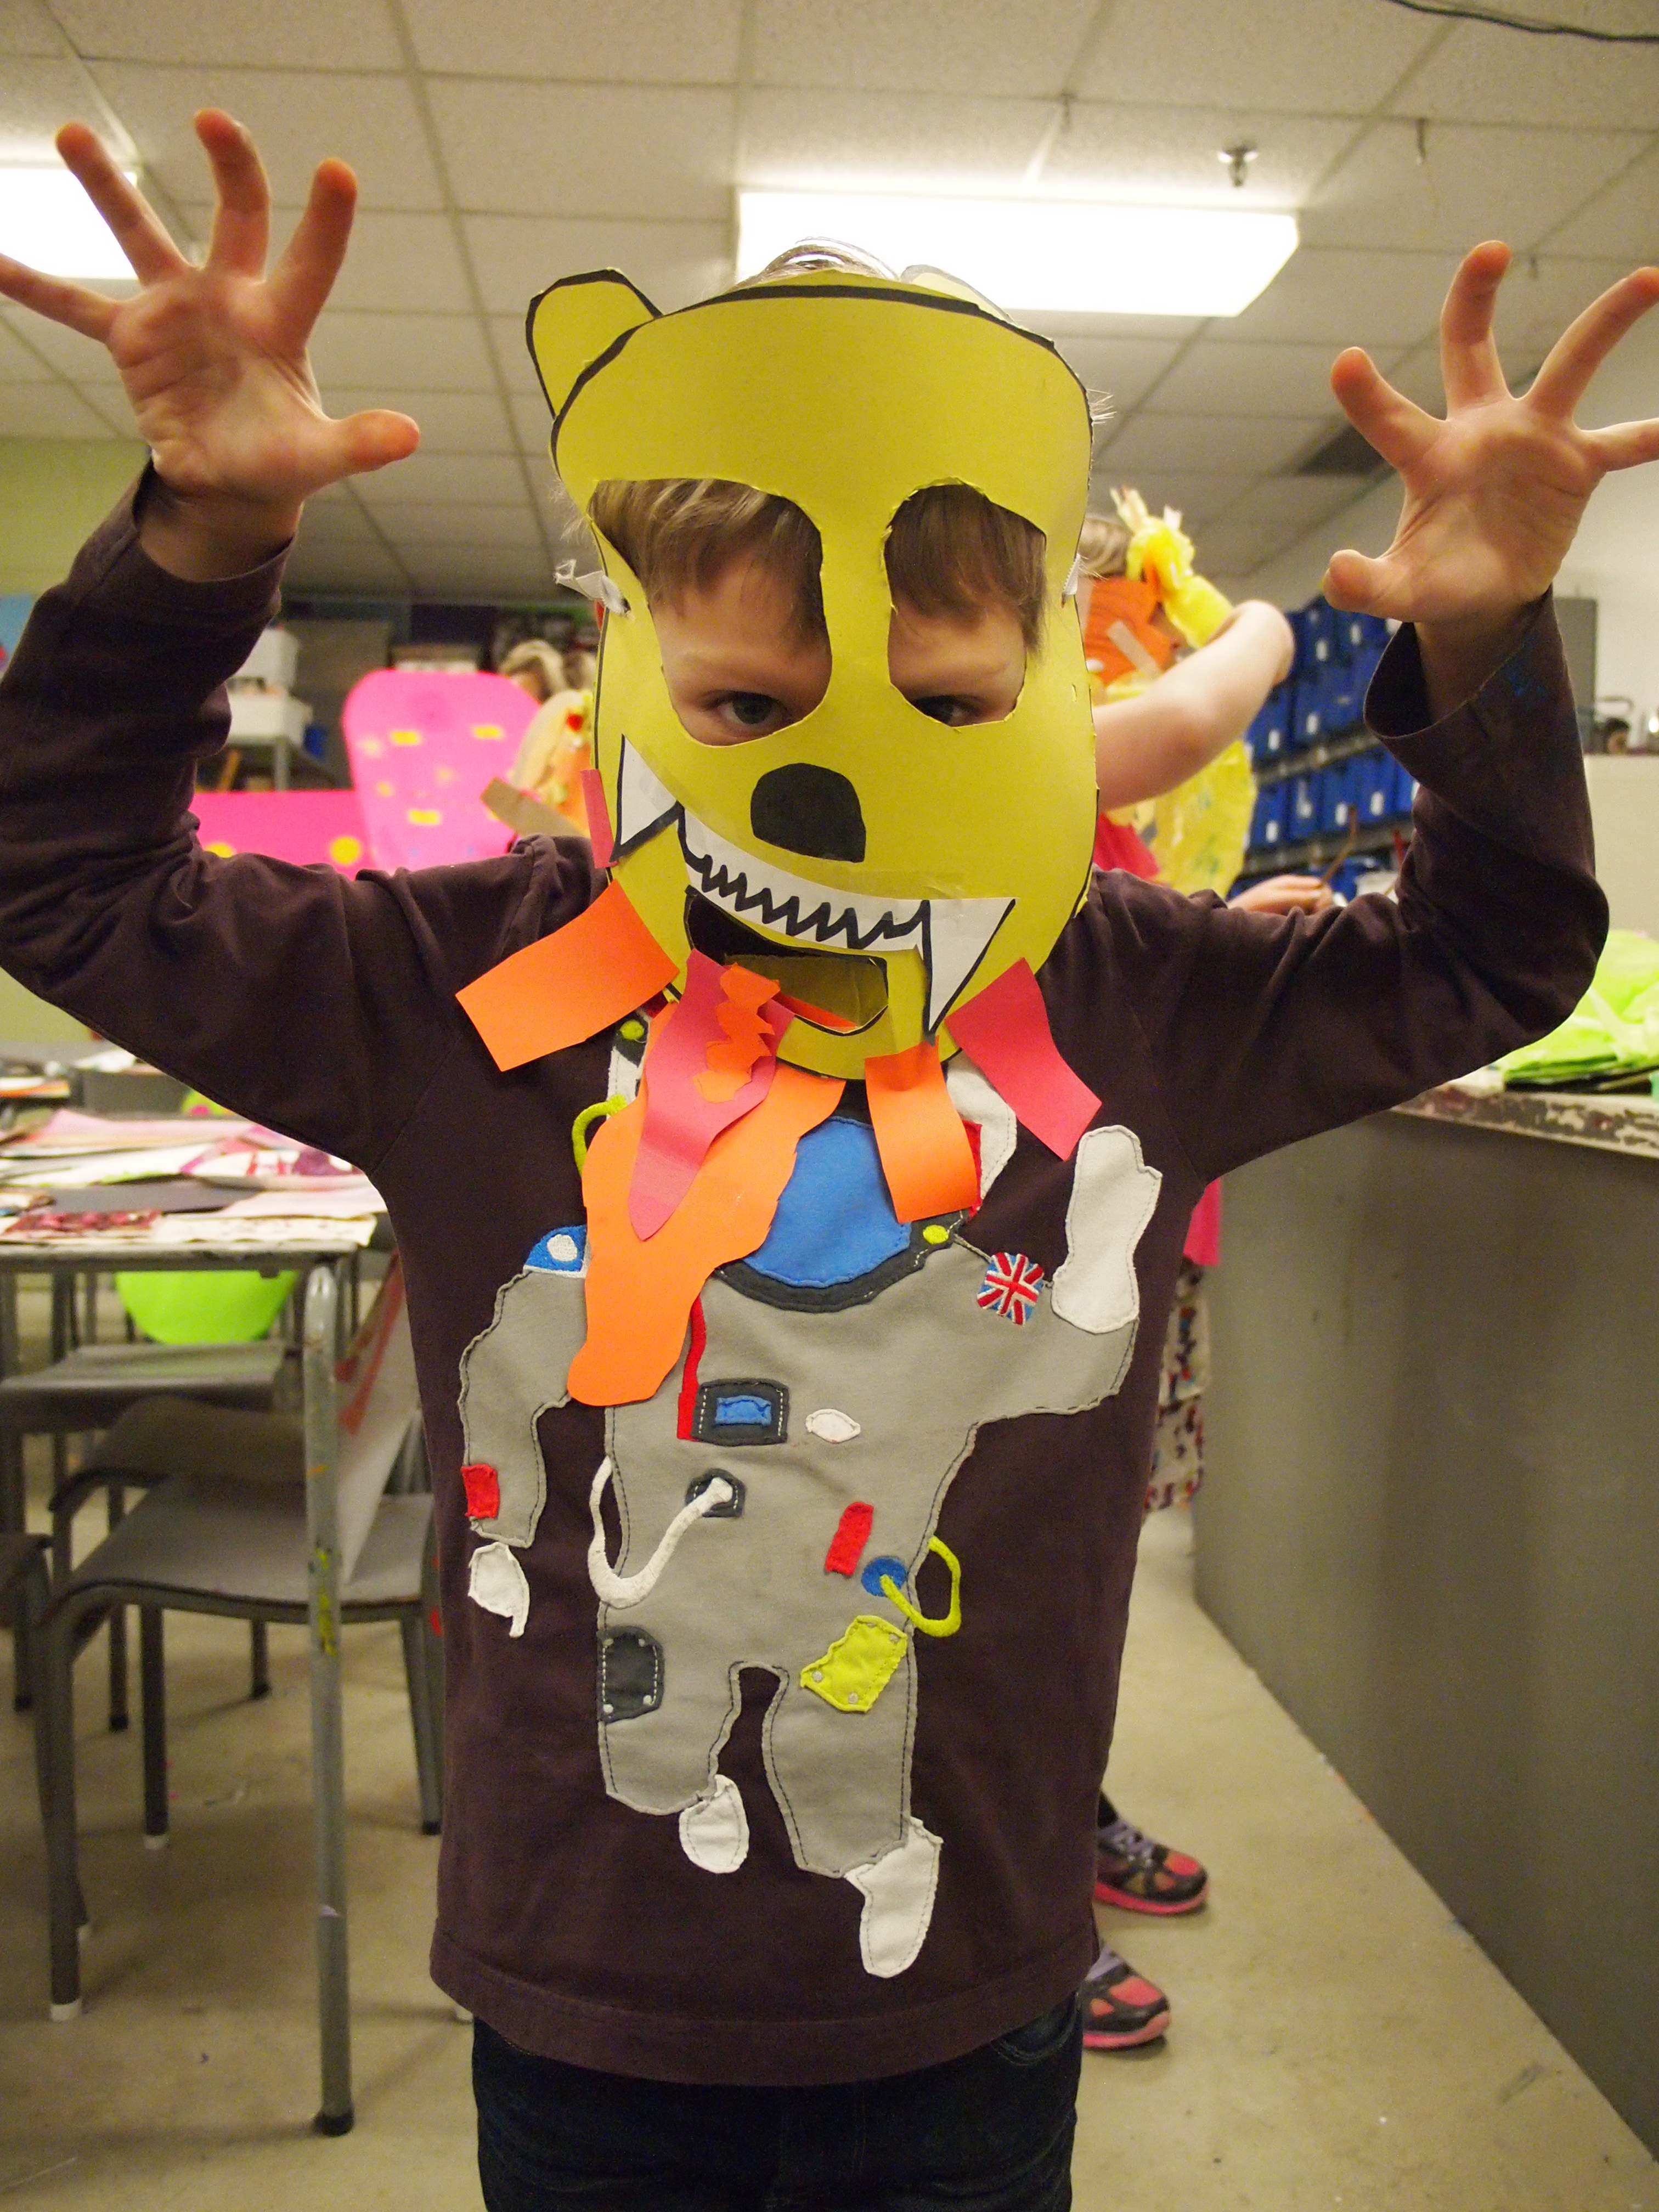 A young boy wearing a yellow paper monster mask poses with hands raised like claws